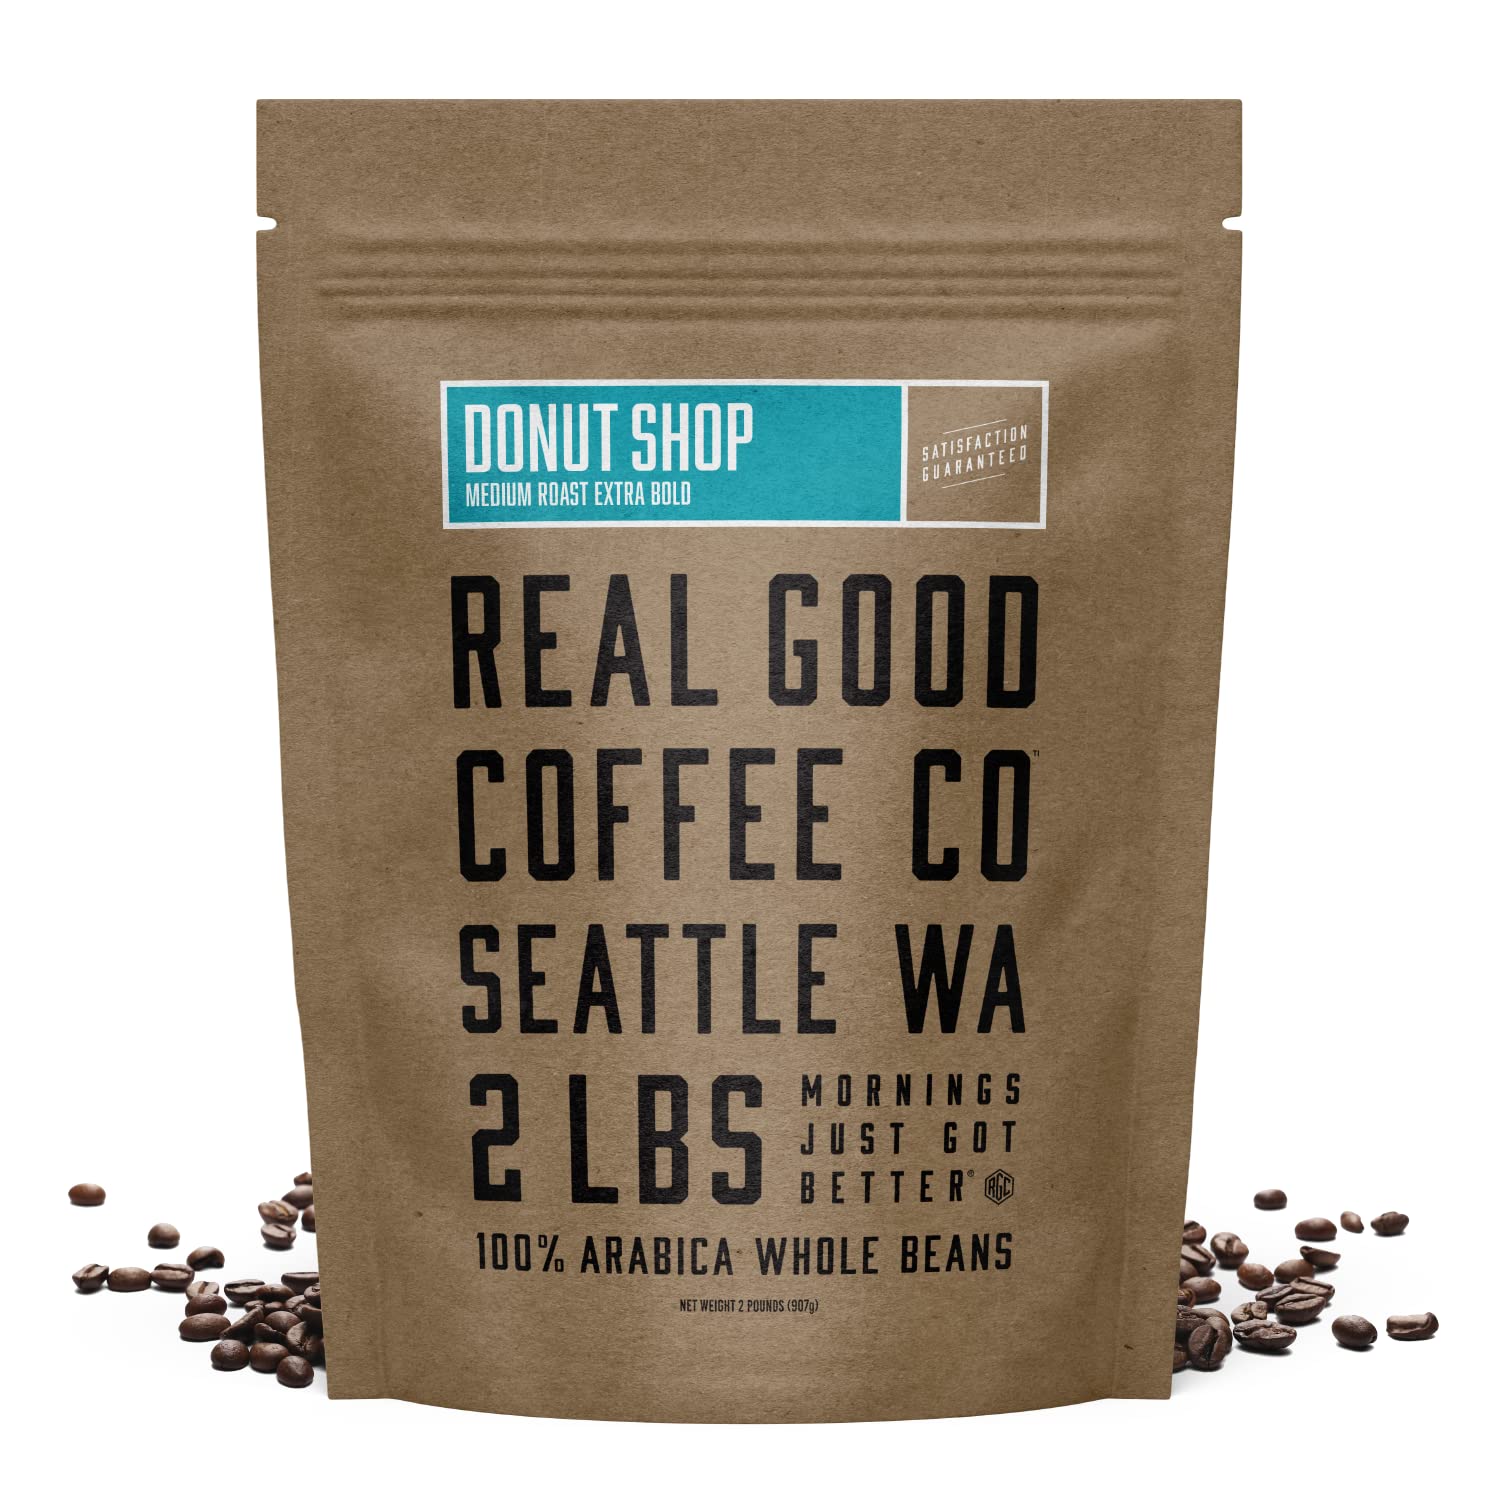 Real Good Coffee Company - Whole Bean Coffee - Donut Shop Medium Roast Coffee Beans - 2 Pound Bag - 100% Whole Arabica Beans - Grind at Home, Brew How You Like